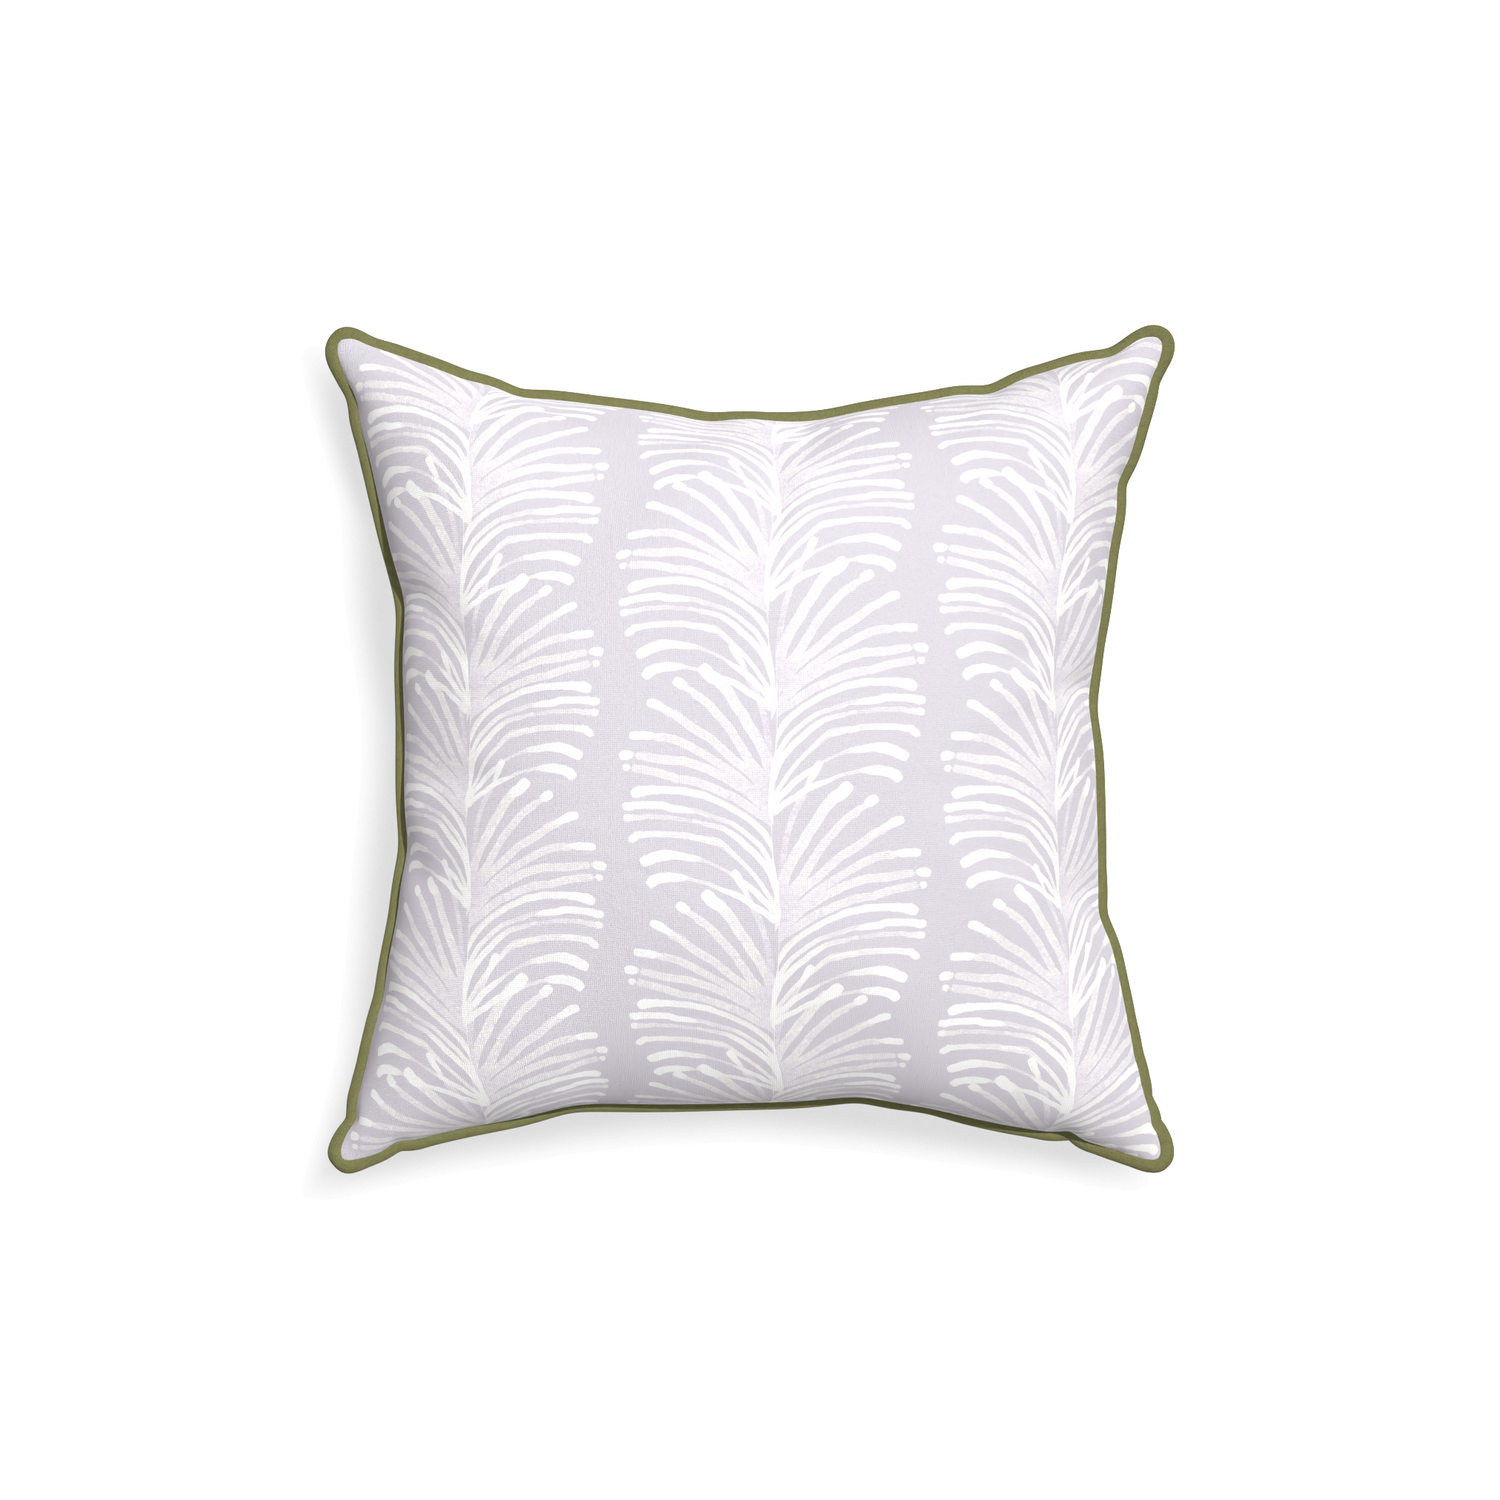 18-square emma lavender custom pillow with moss piping on white background